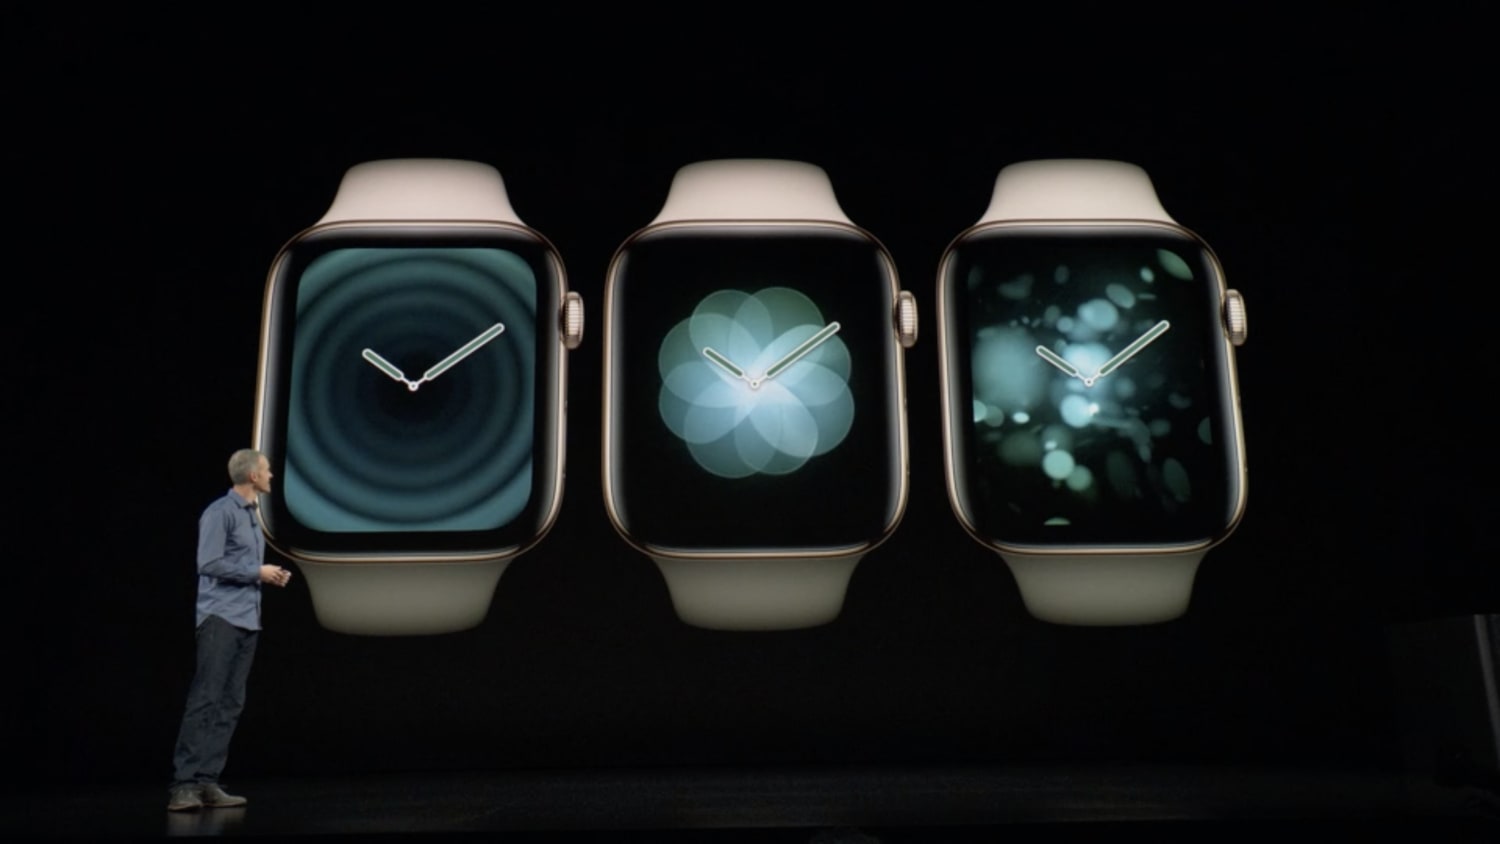 Apple's Breathe app on the Apple Watch has been confusing people for years